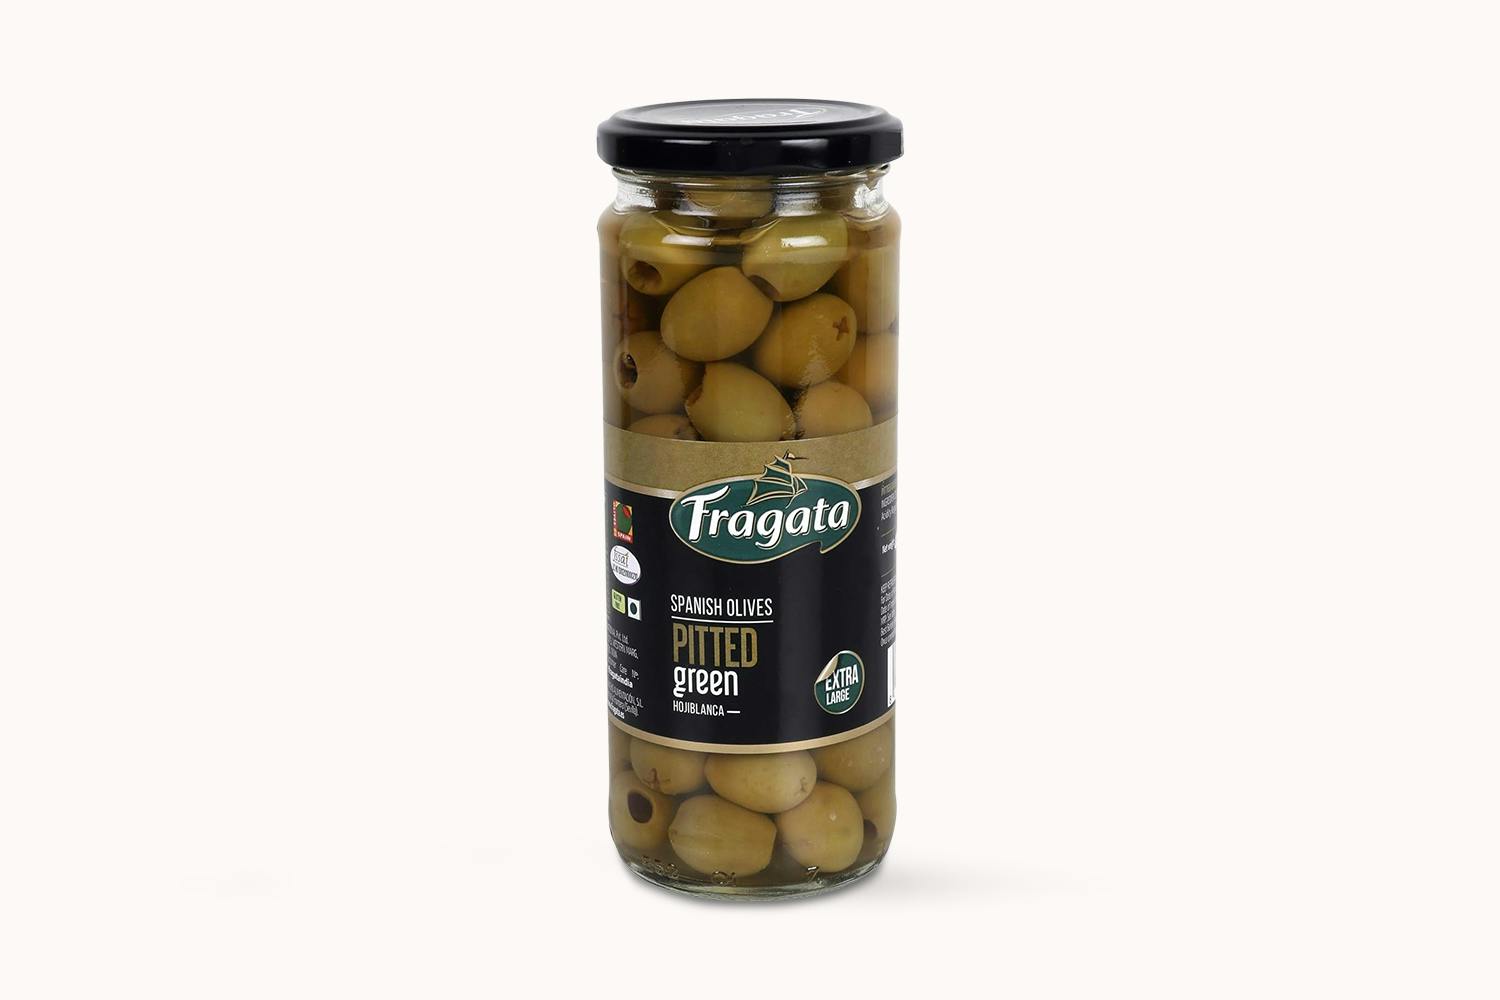 Fragata Green Olives - Pitted